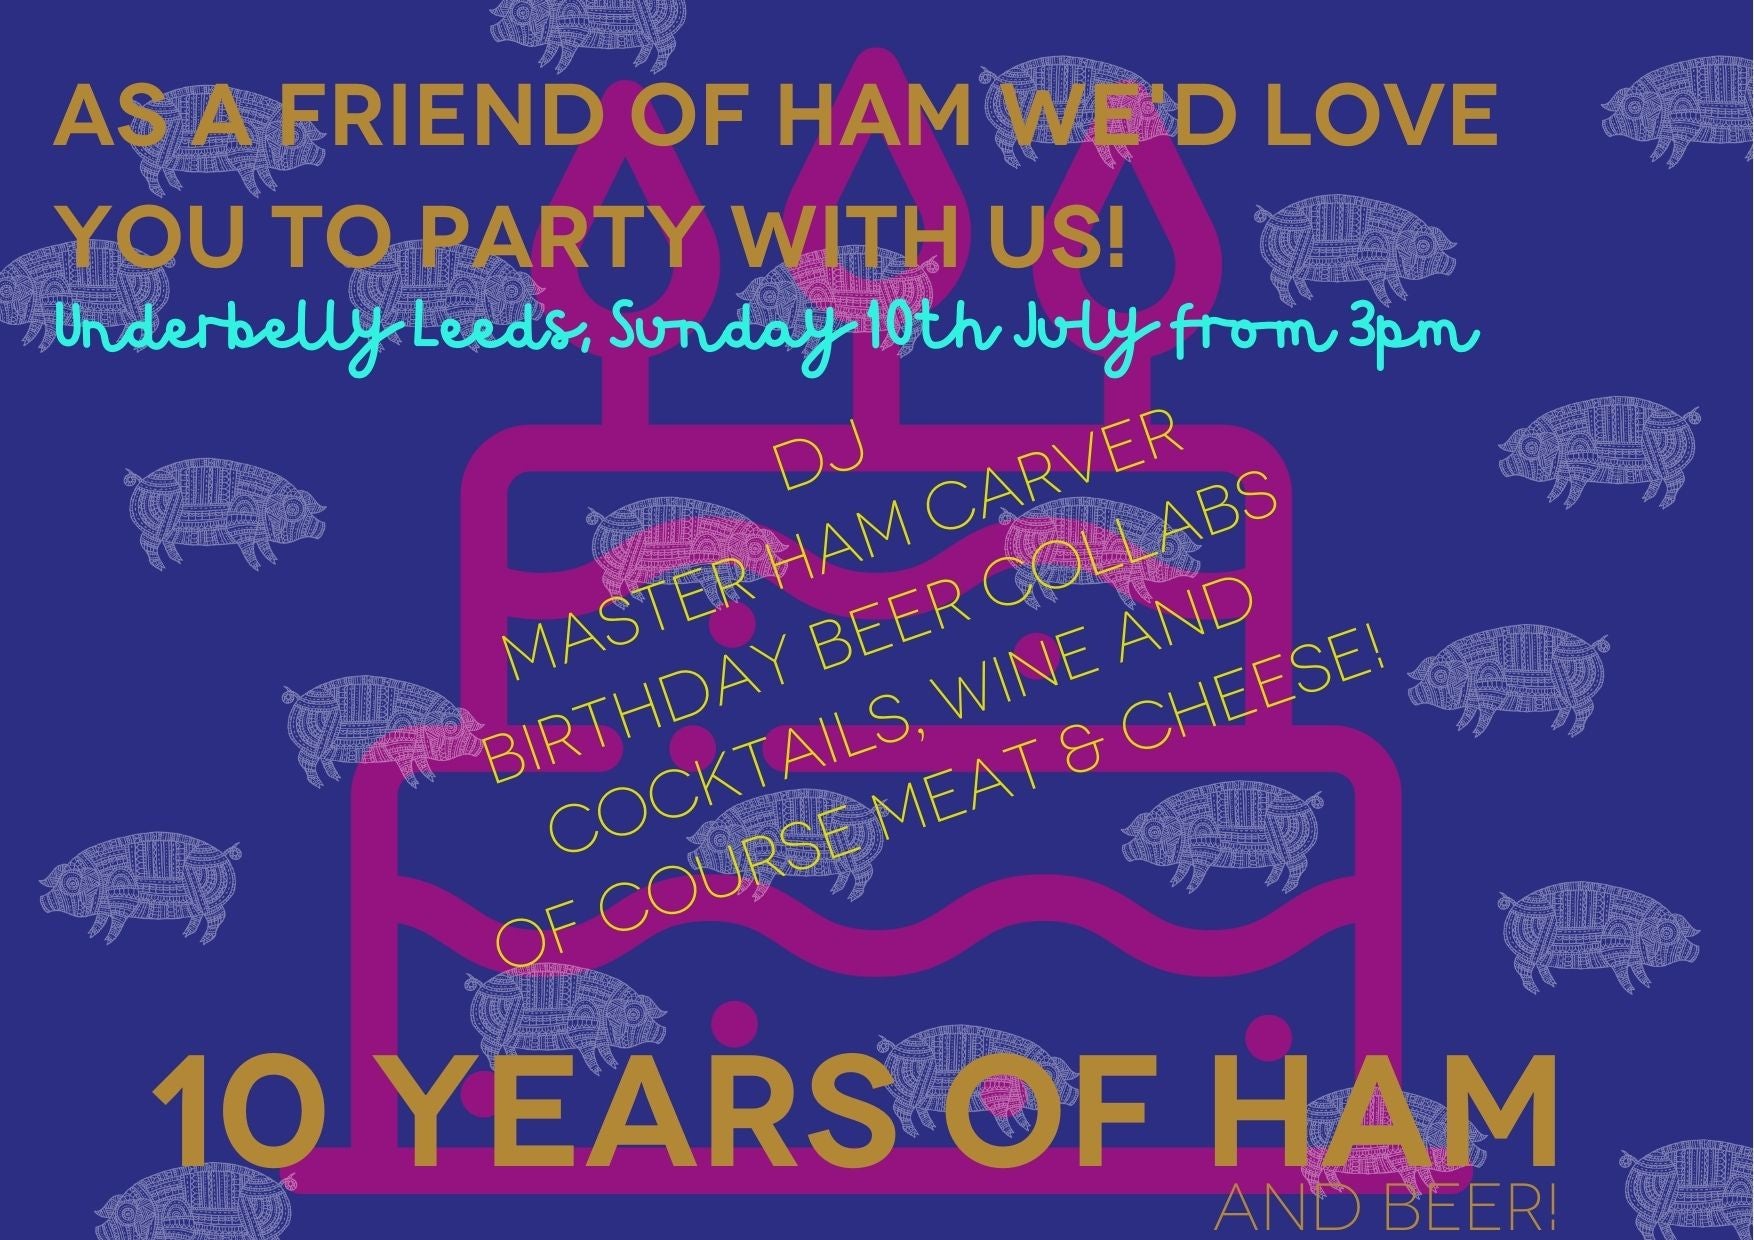 friends of ham 10 year anniversary leeds party sunday 10th july with birthday beers and DJ